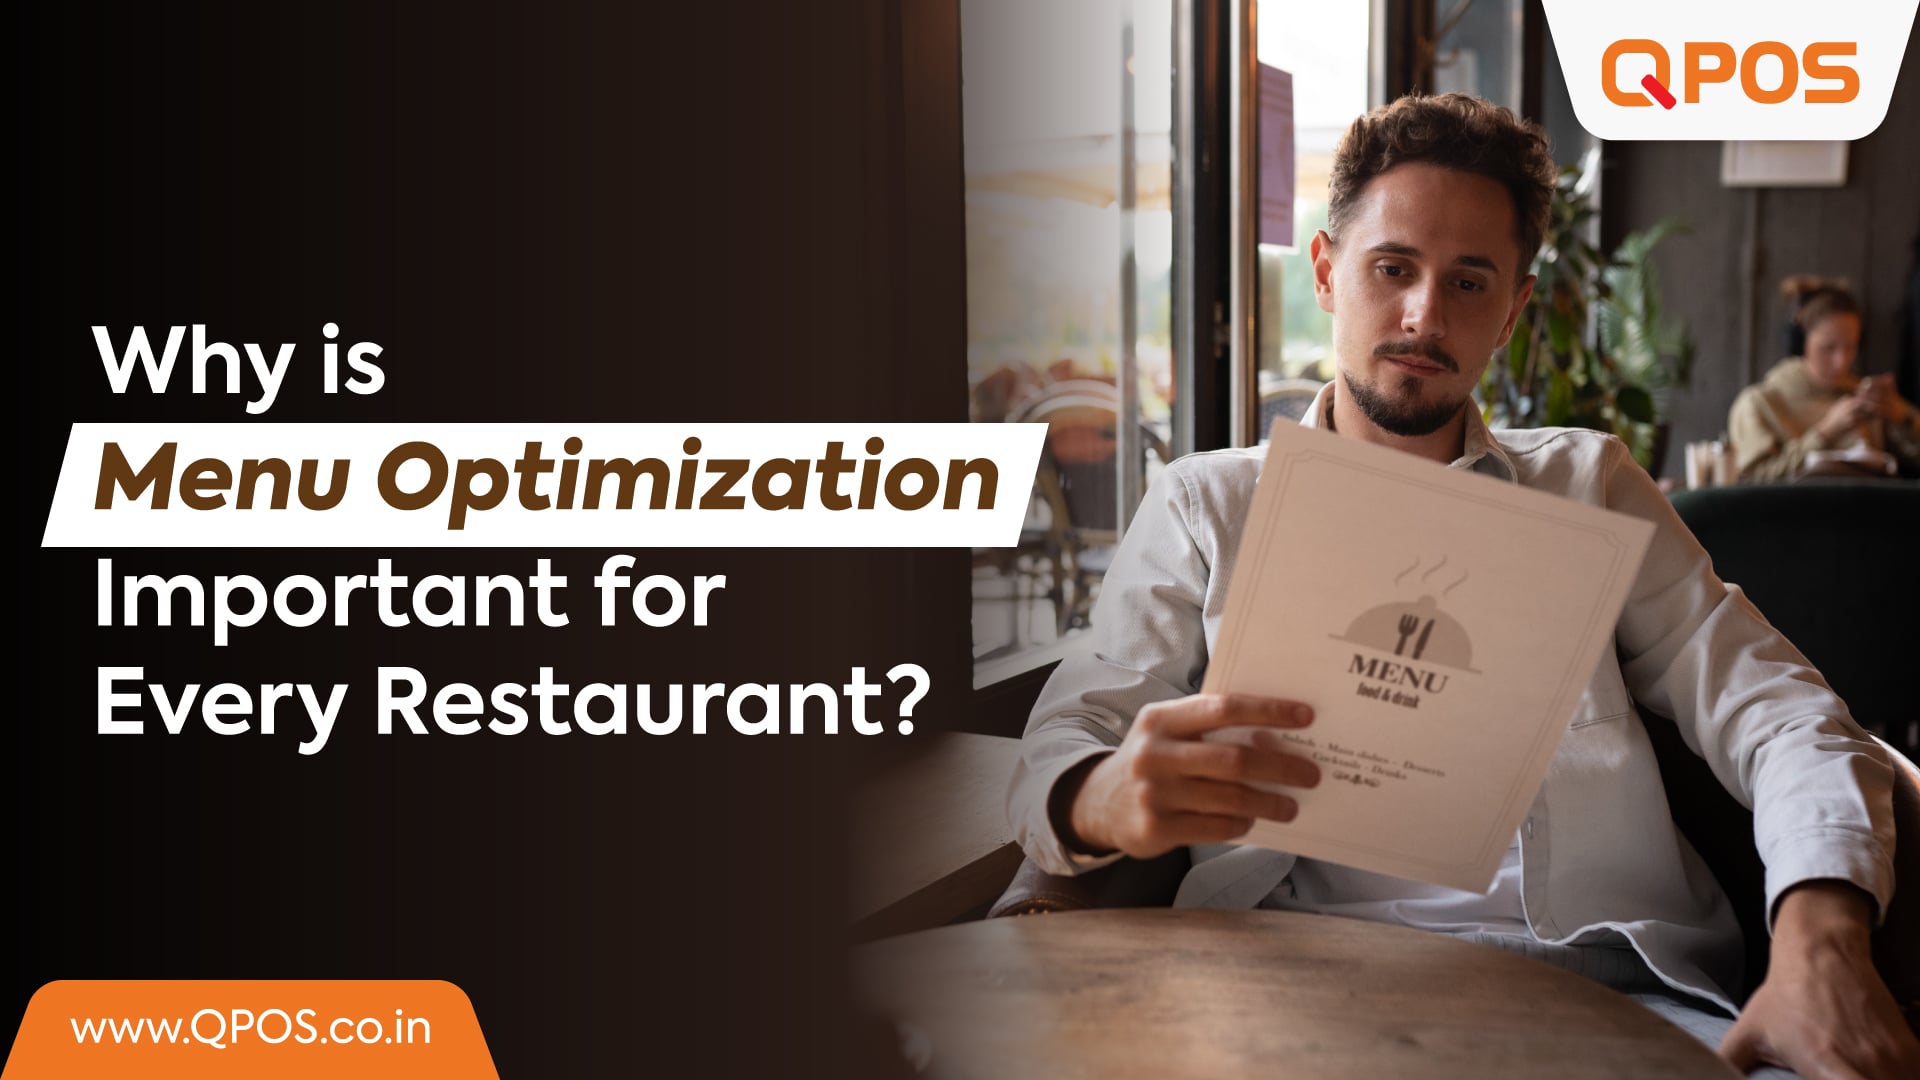 Why is Menu Optimization Important for Every Restaurant?